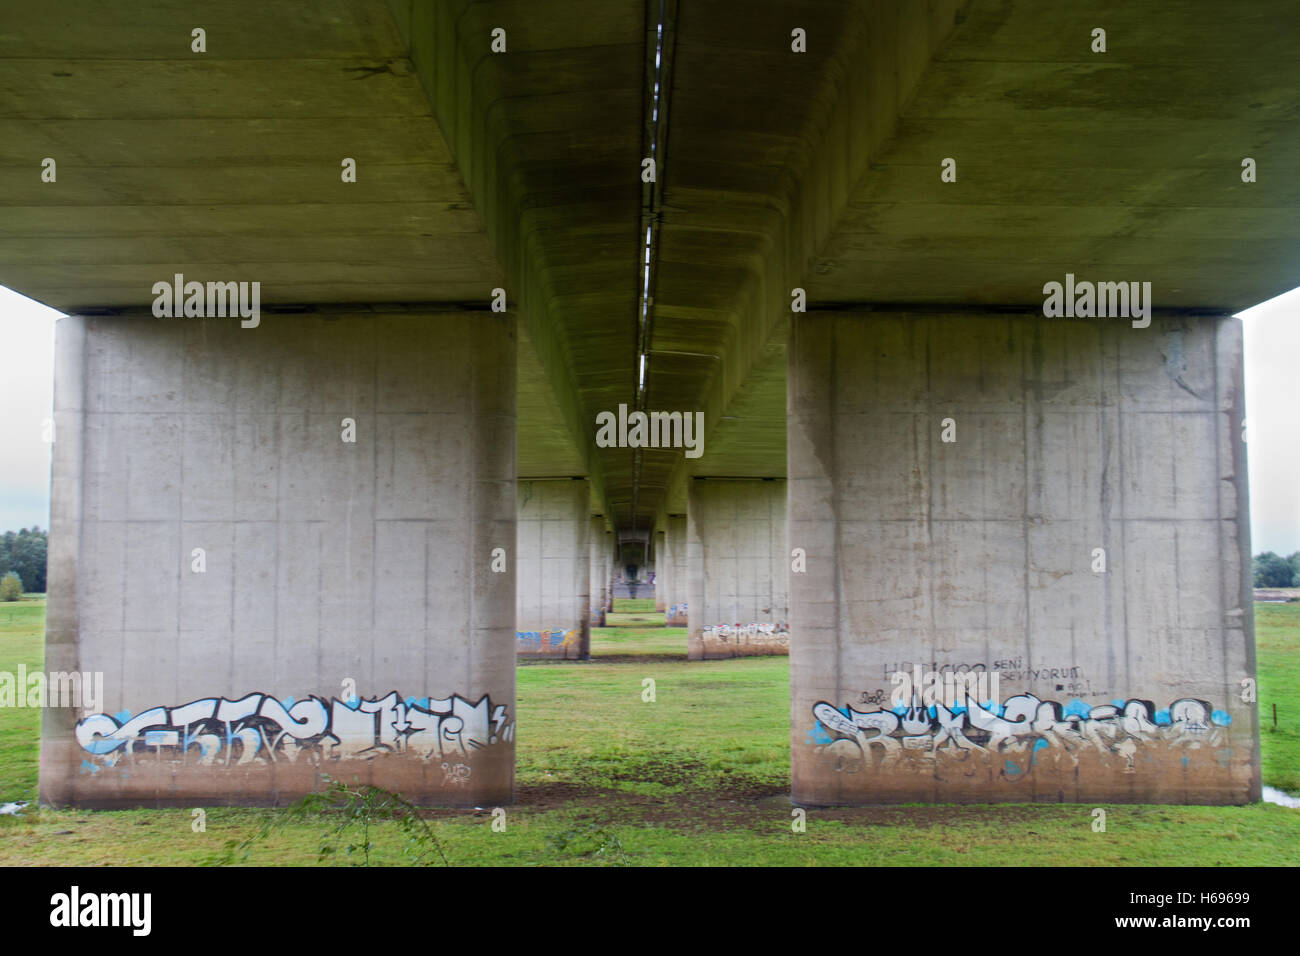 Graffiti on pillars of the road bridge over the Ijssel river and its floodplain near Deventer in the Netherlands Stock Photo